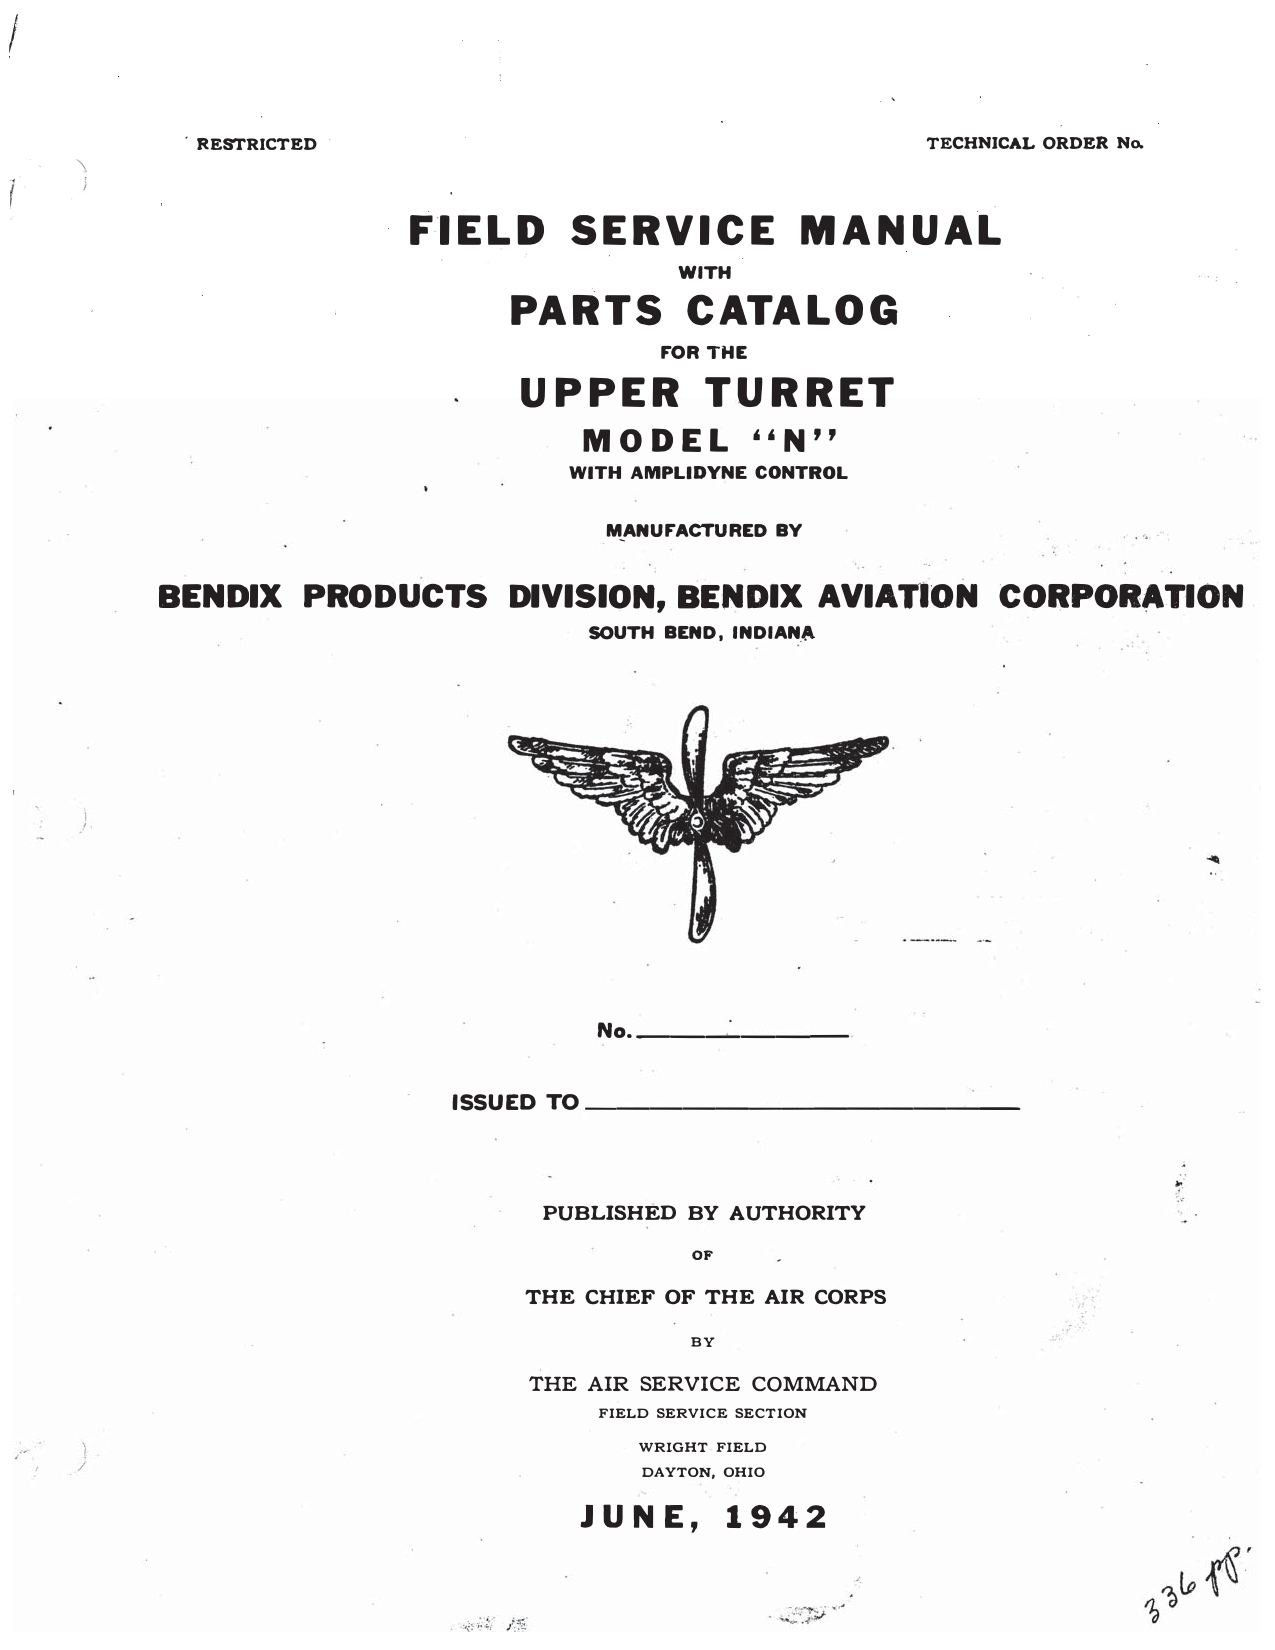 Sample page 1 from AirCorps Library document: Field Service Manual & Parts Catalog - Upper Turret Model 